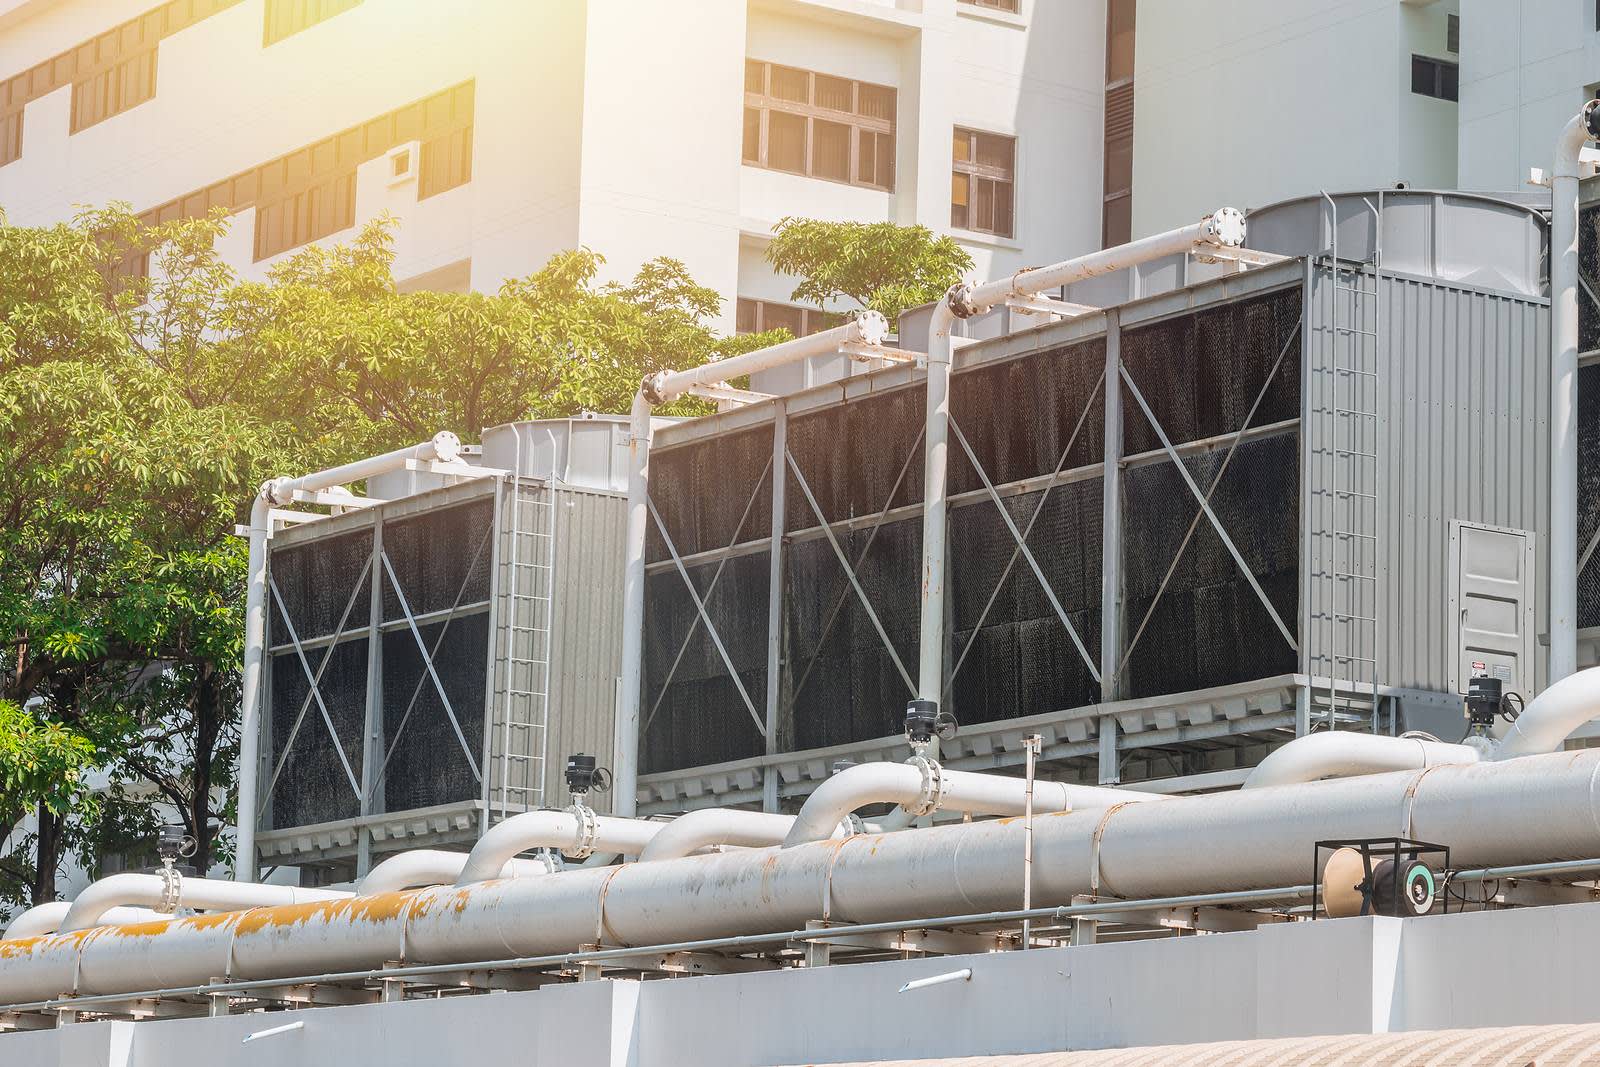 How heat pumps can help decarbonise the UK